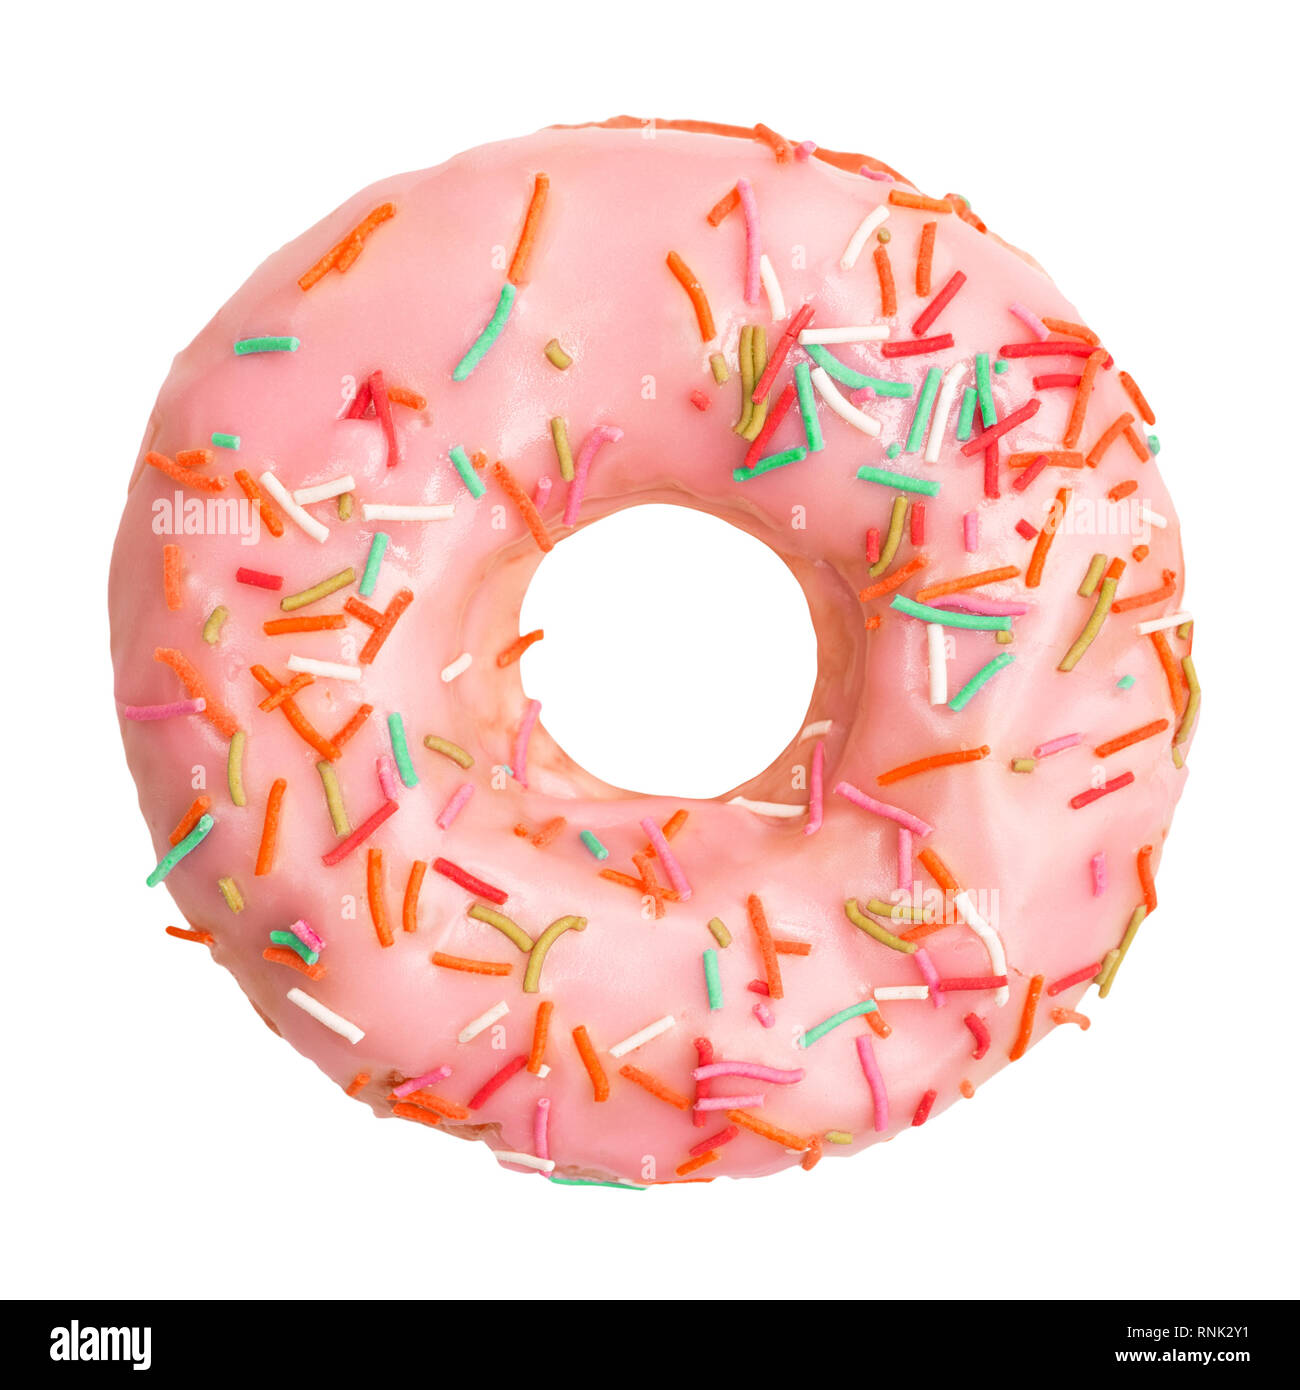 Colorful donut decorated with sprinkles isolated on white background Stock Photo